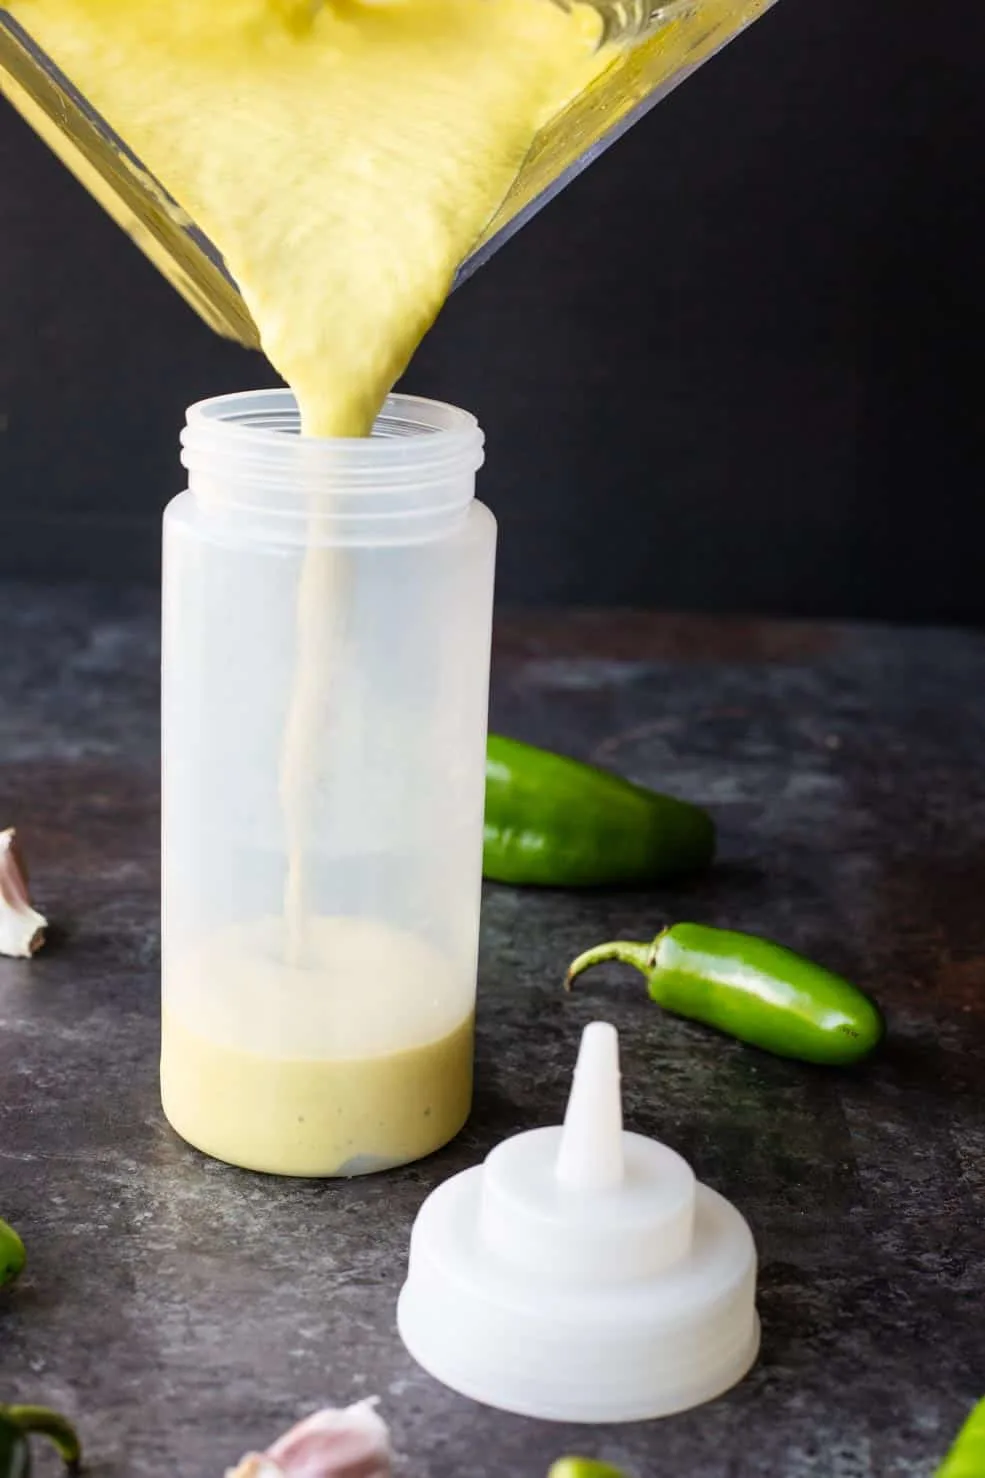 Fiery jalapeno sauce being poured into a wide mouthed bottle.